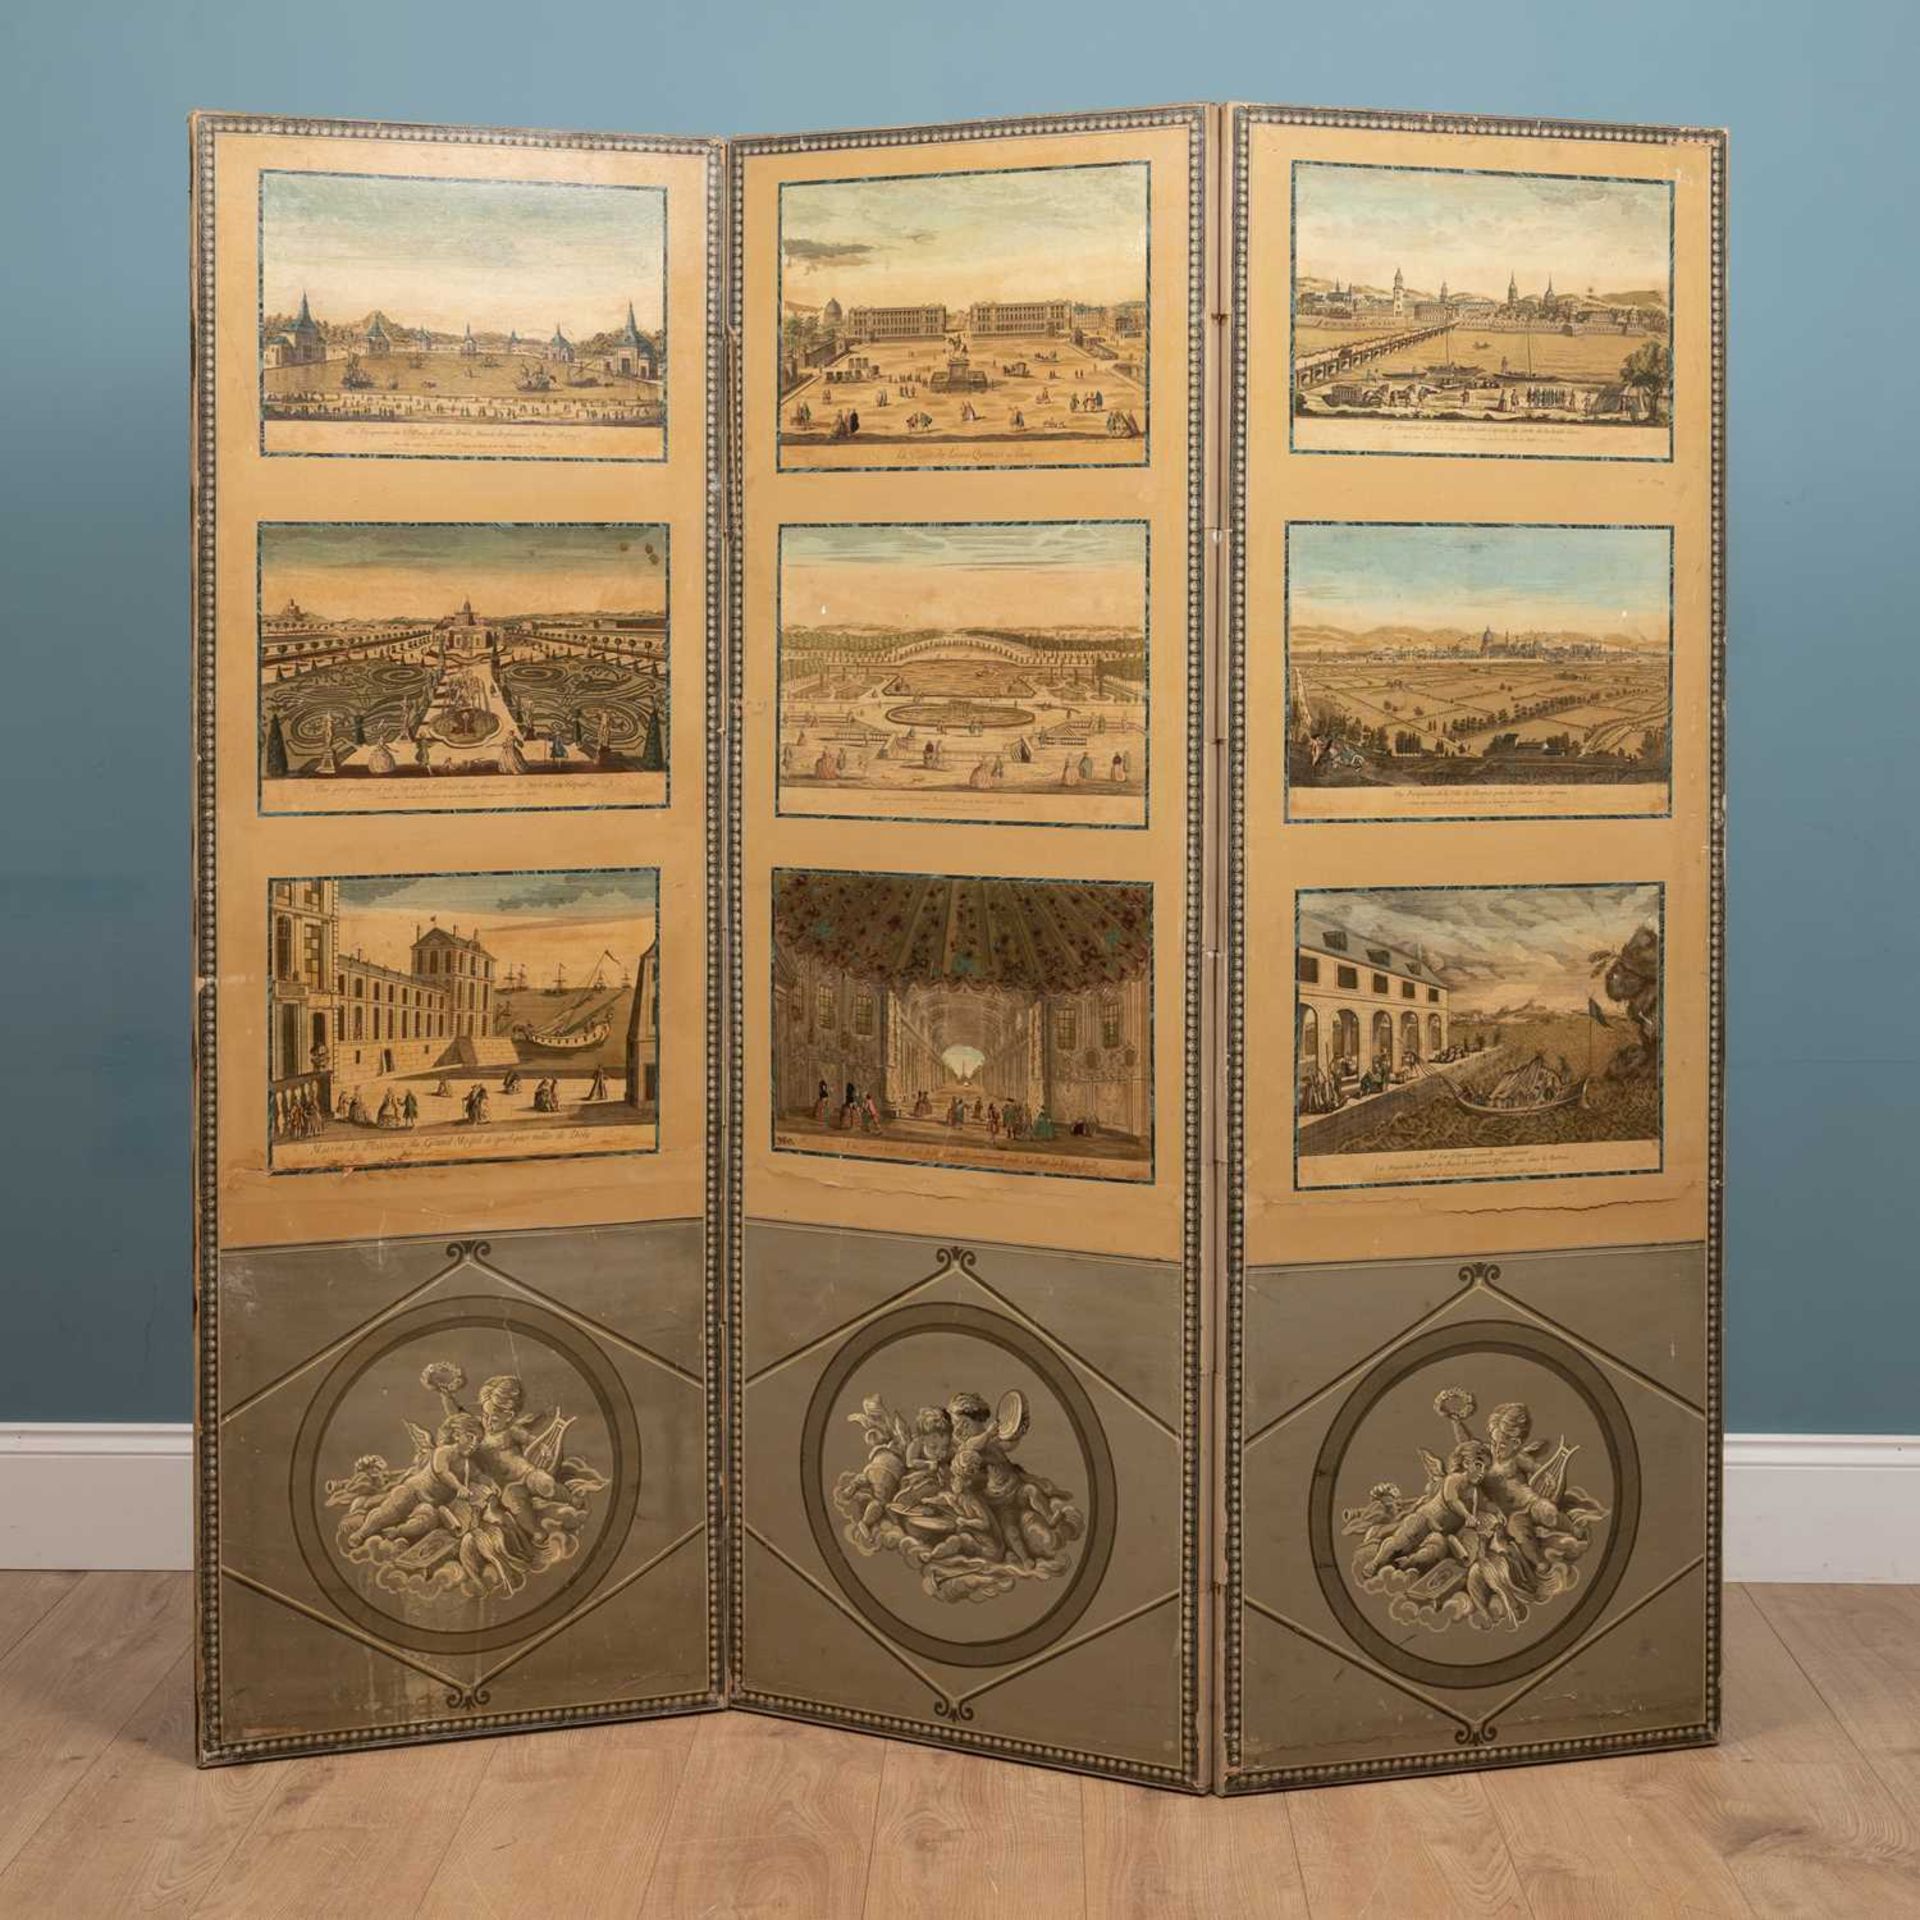 A folding canvas screen decorated with nine 18th century French etchings